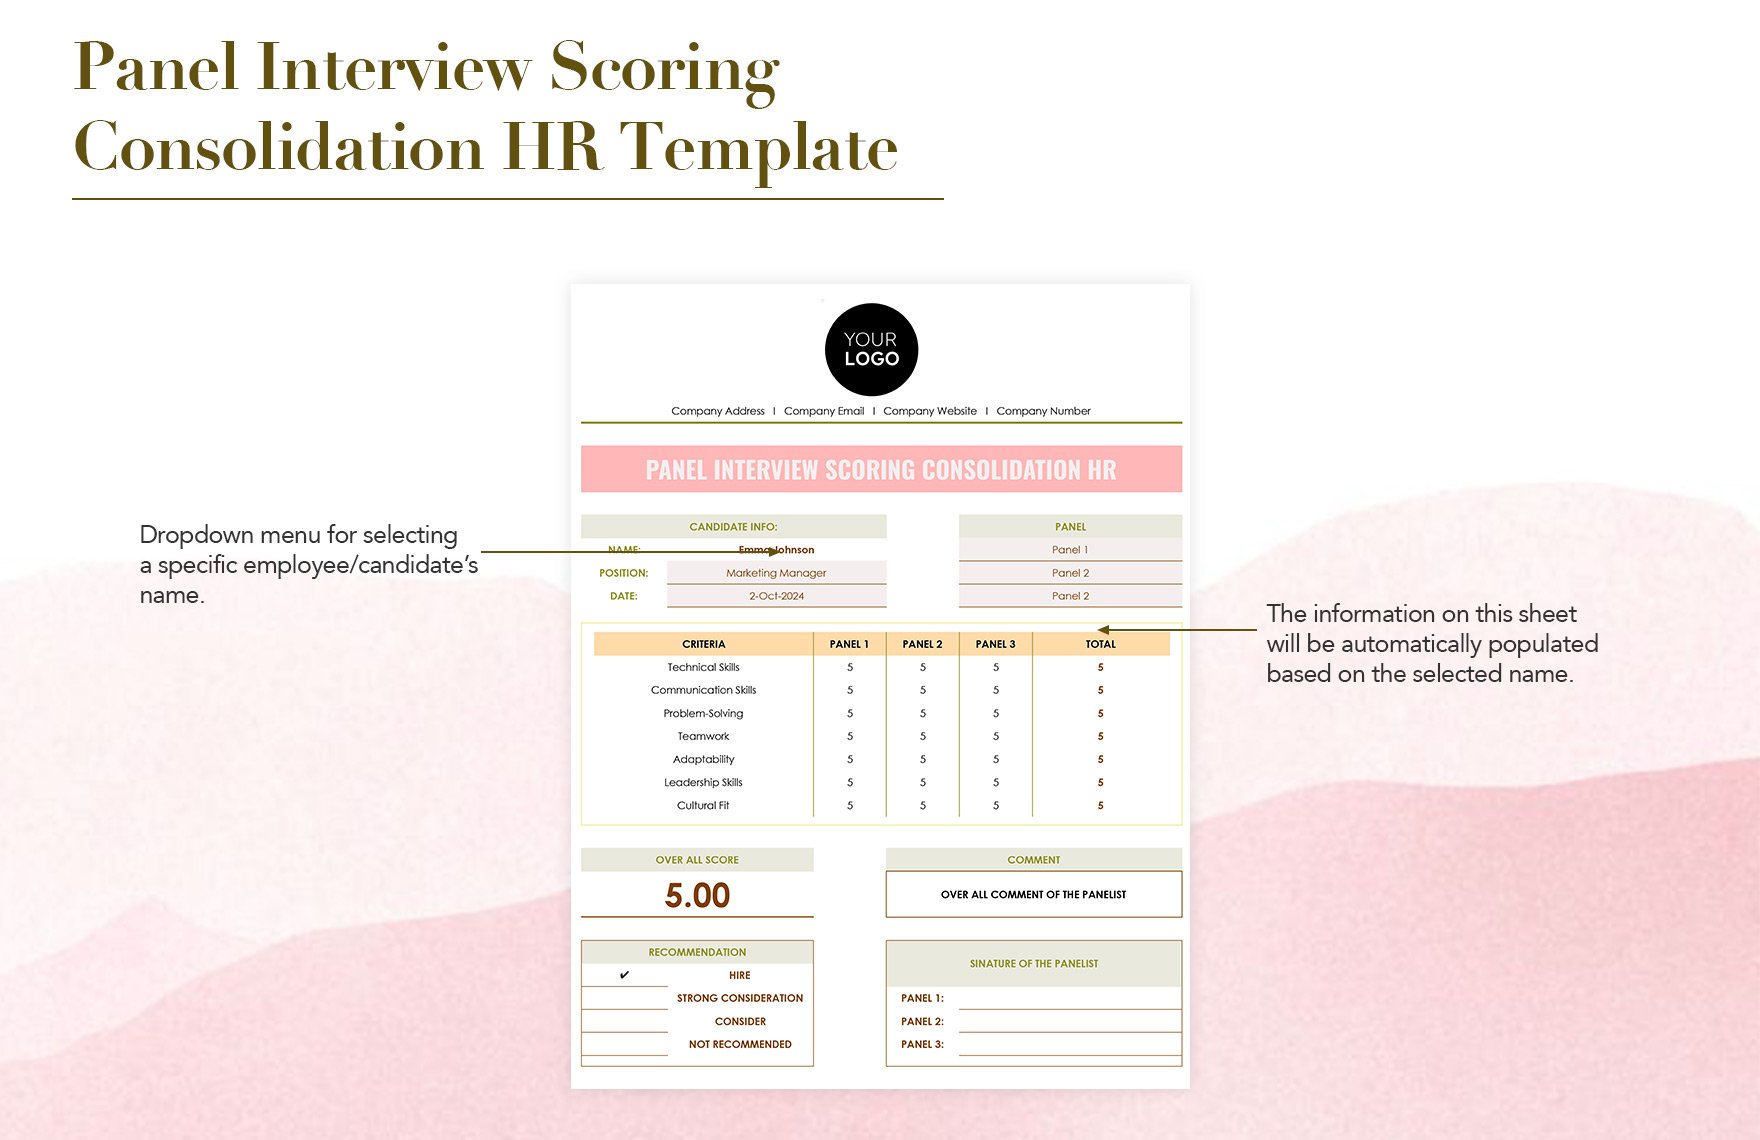 Panel Interview Scoring Consolidation HR Template